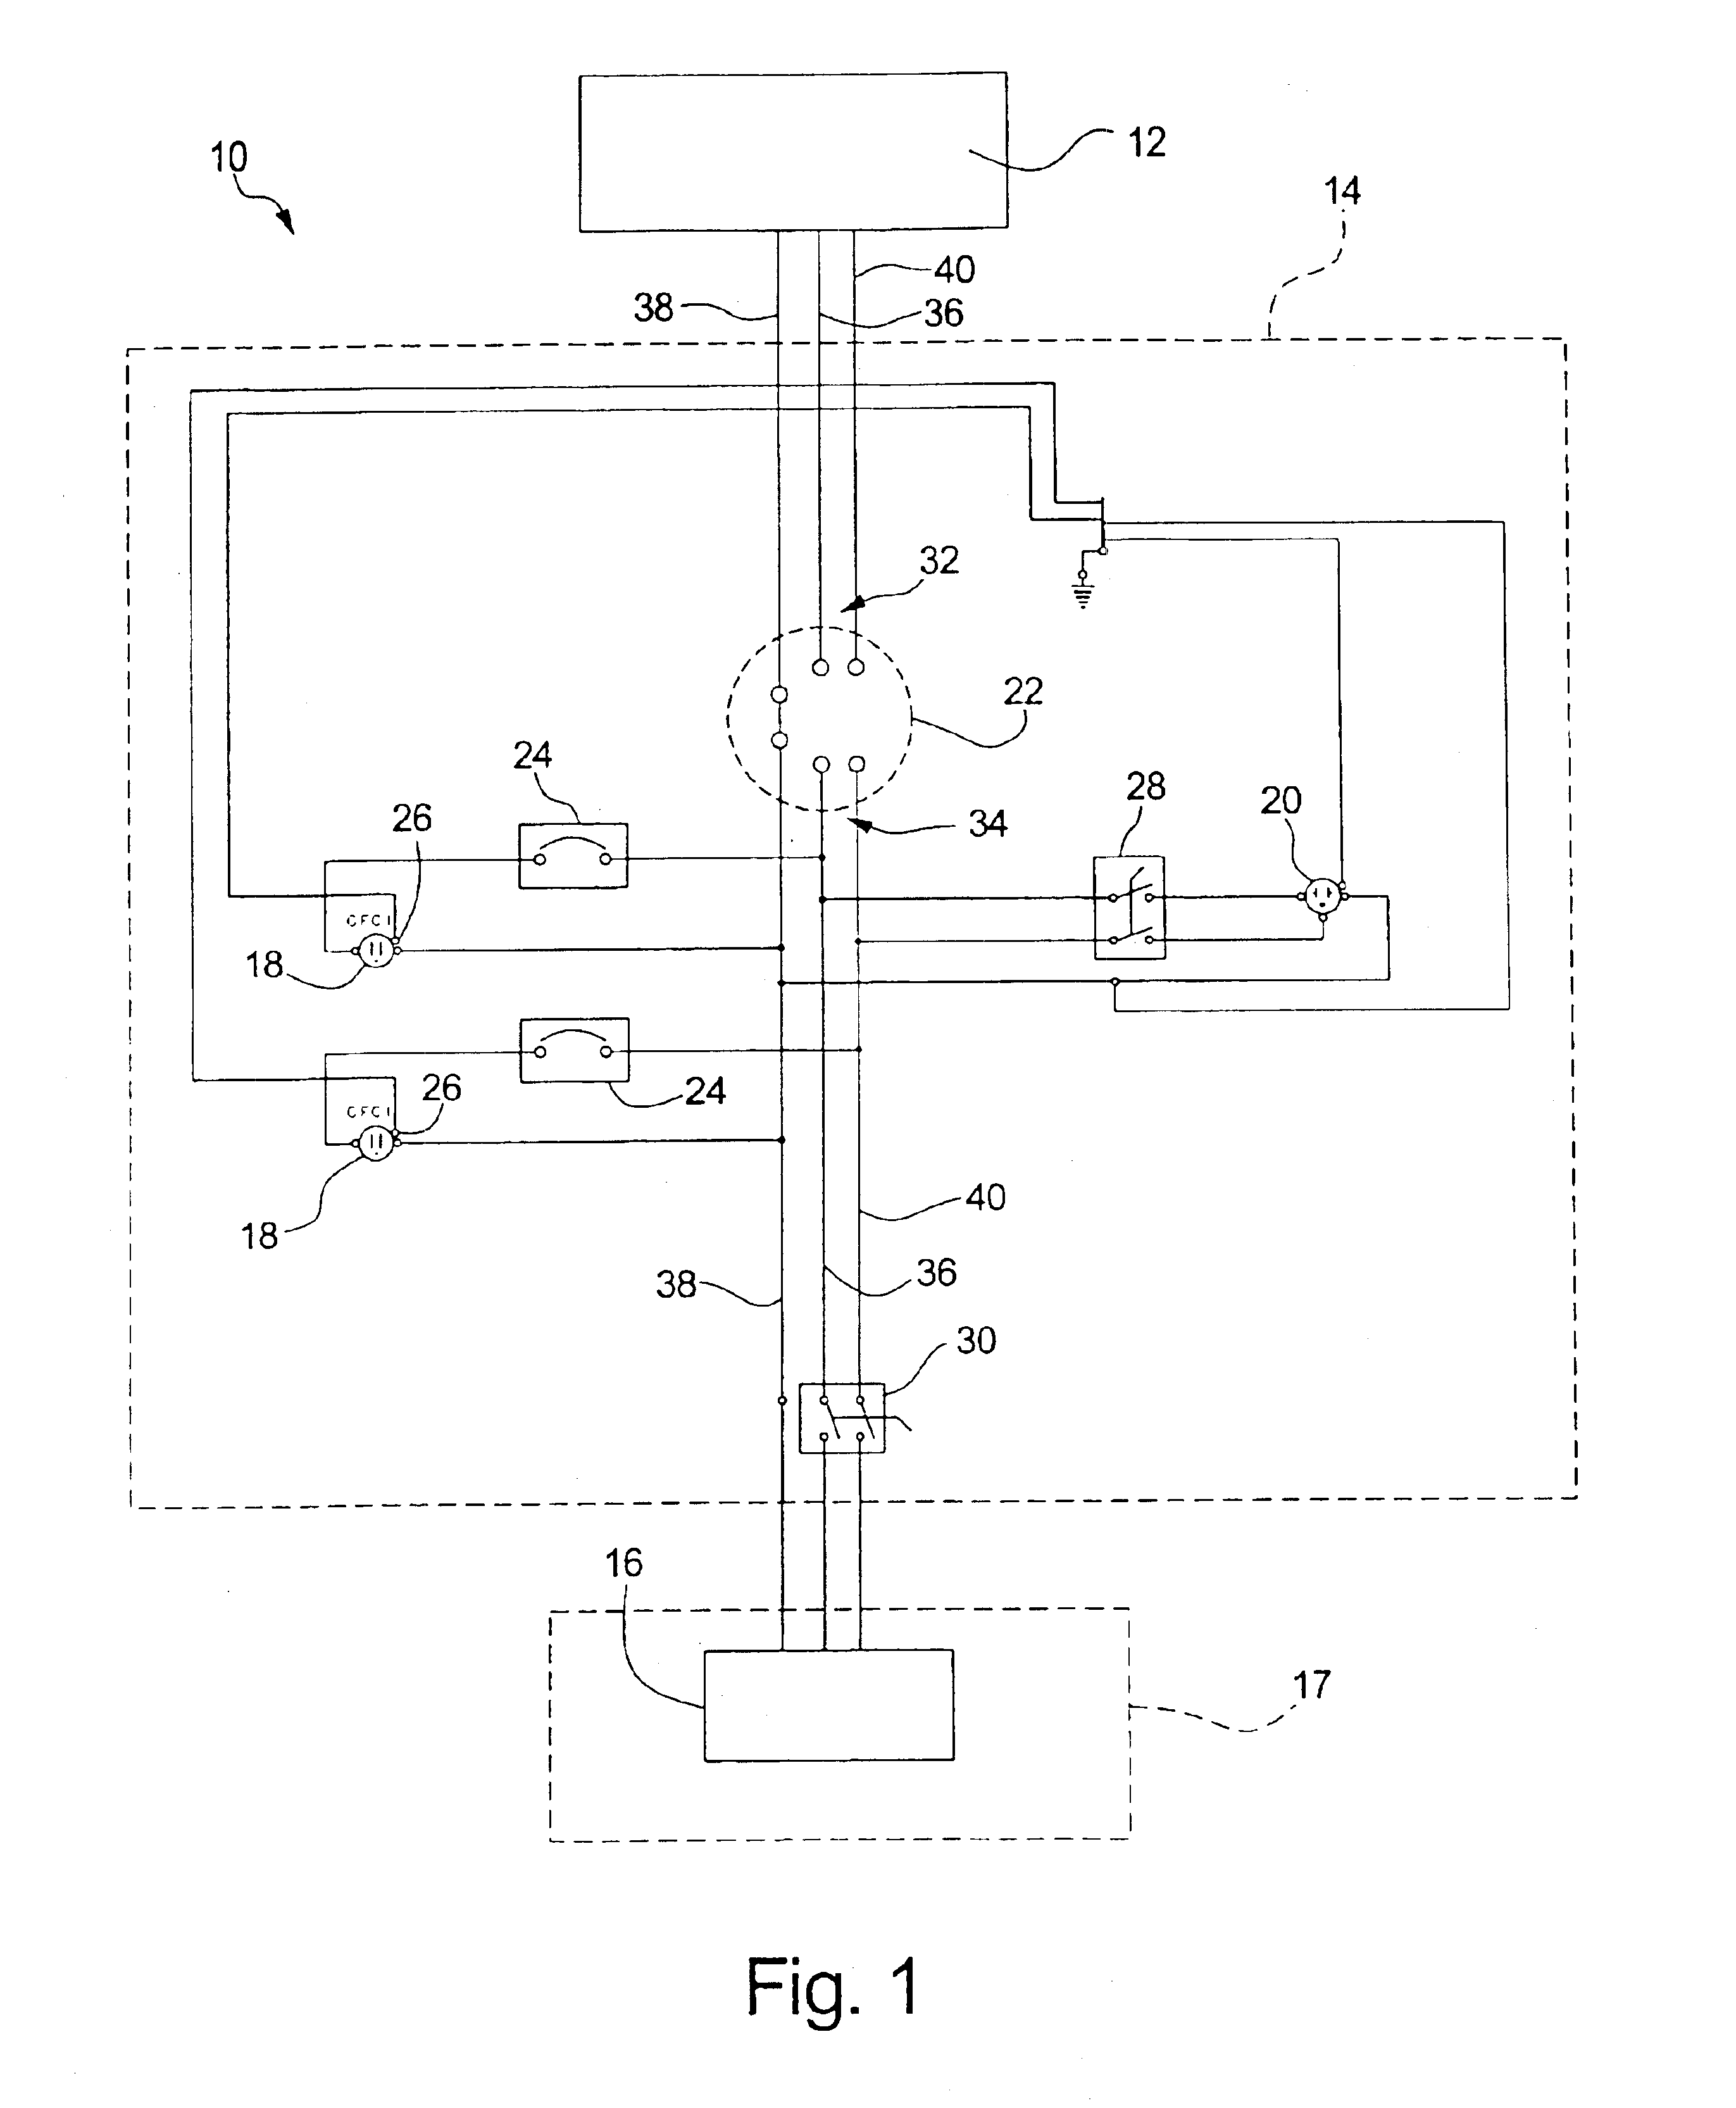 Device and method for providing electric service